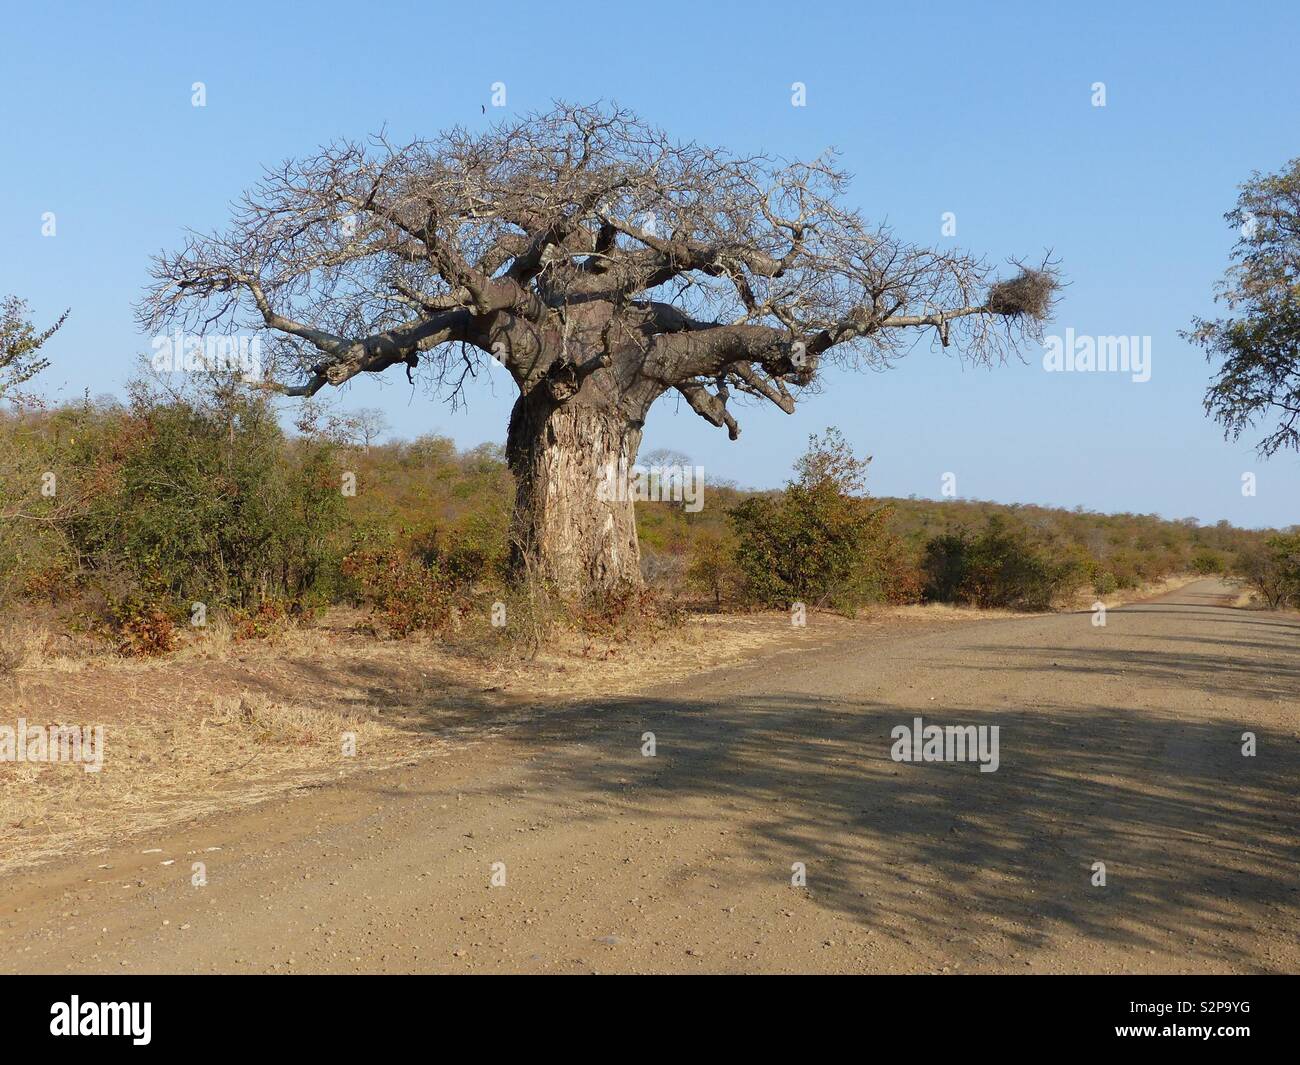 Baobab tree in Kruger Park South Africa Stock Photo